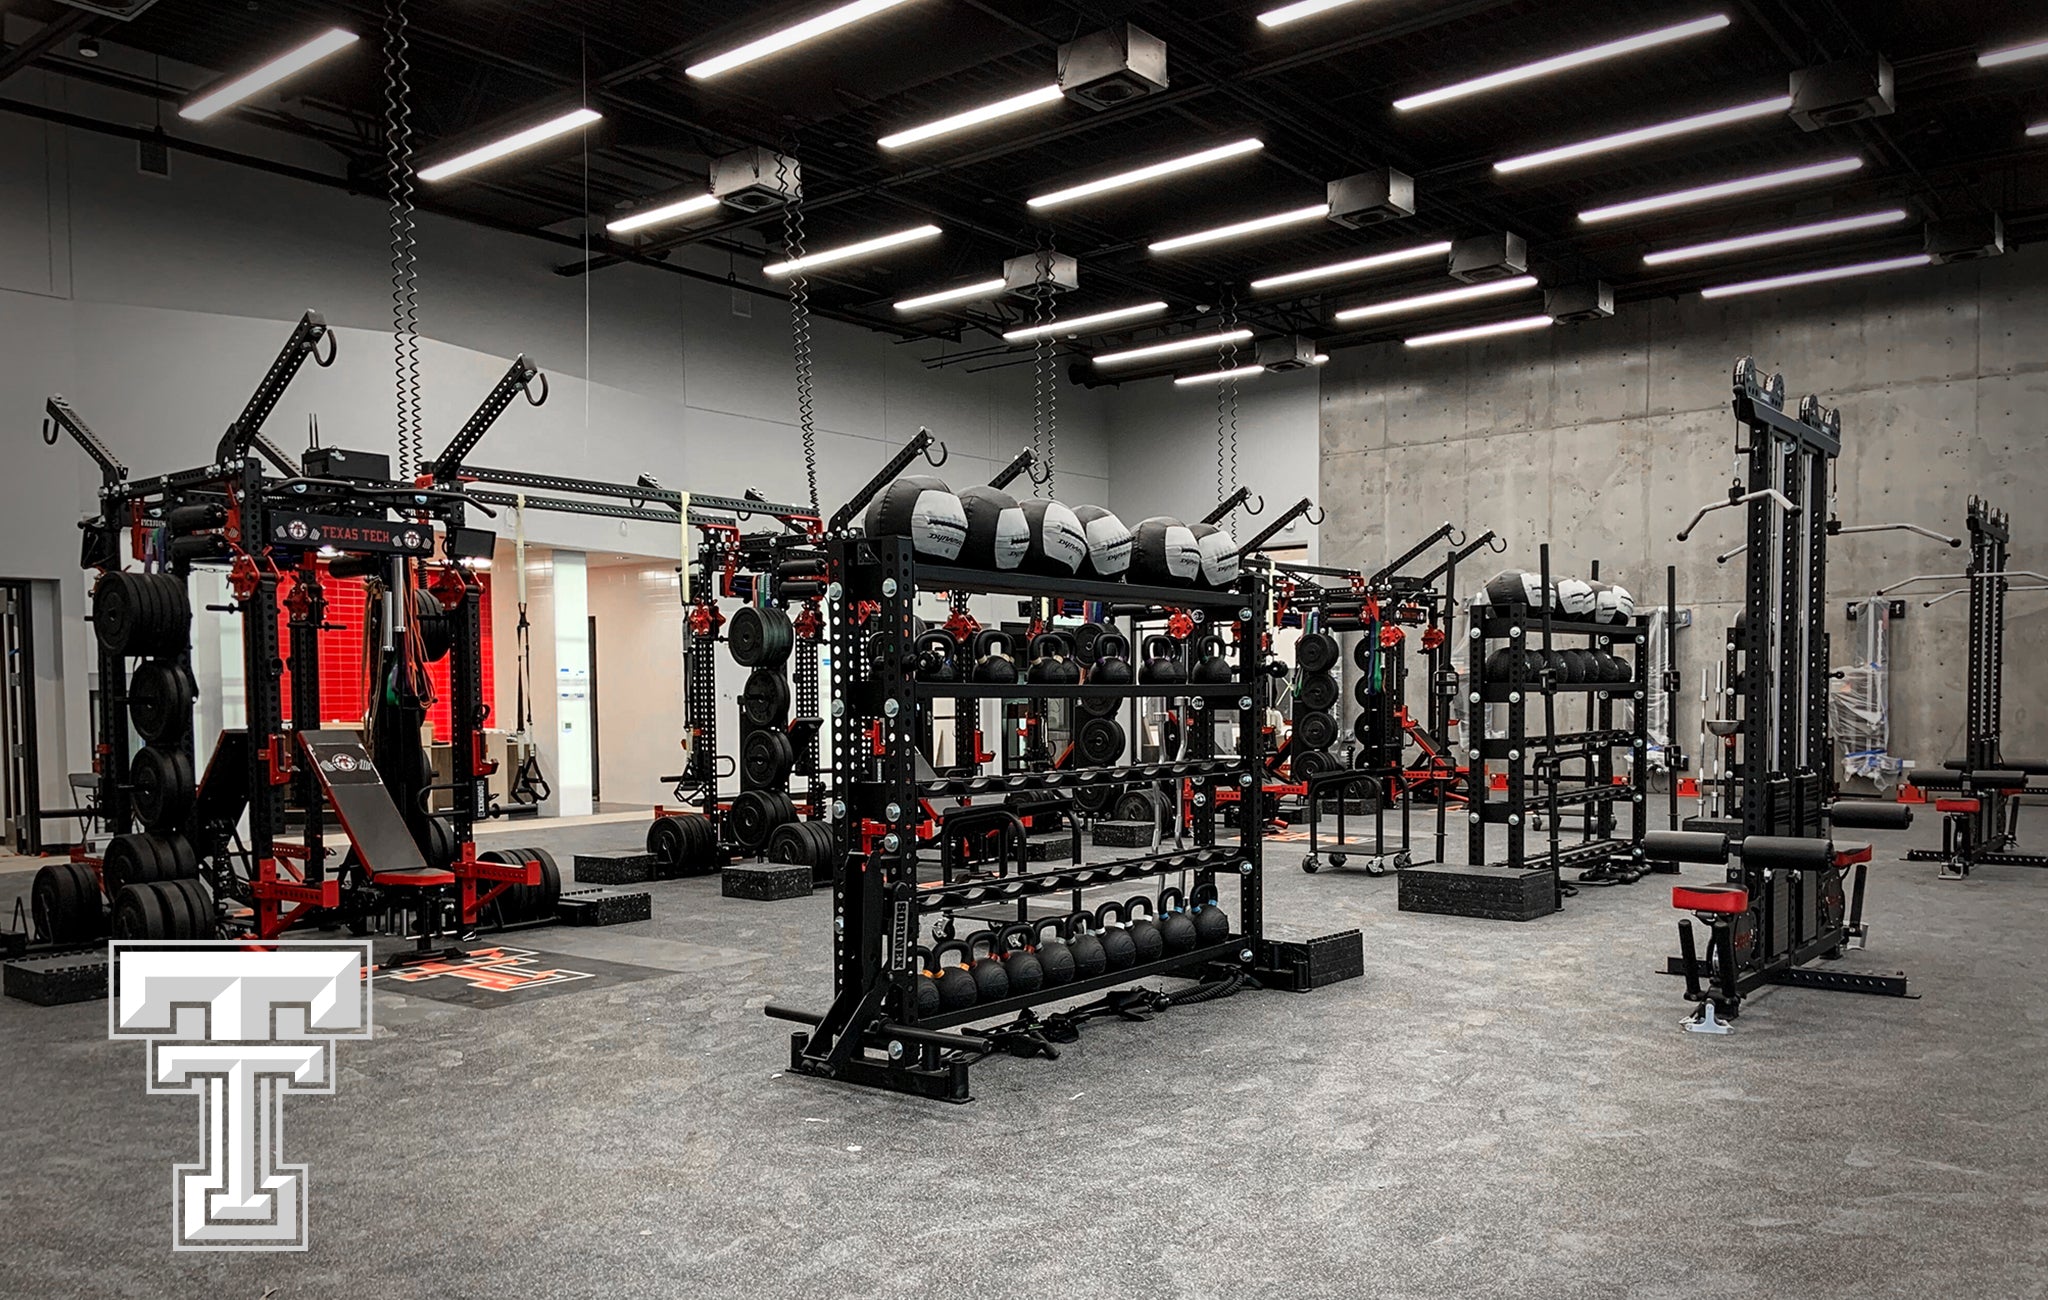 Texas Tech University Sorinex strength and conditioning facility